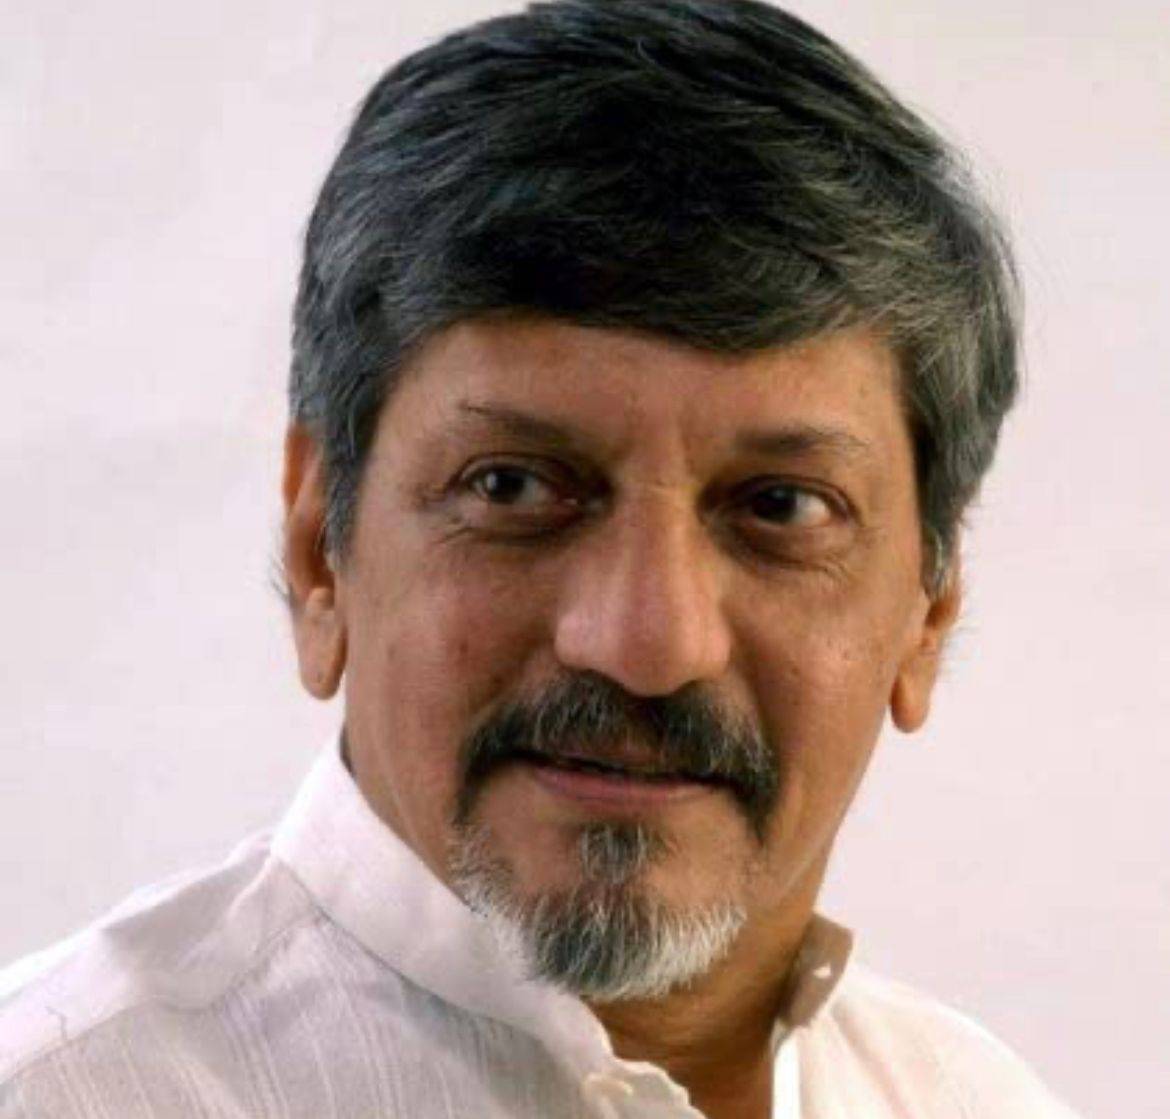 Amol Palekar was hospitalized in Pune due to Covid, condition stable